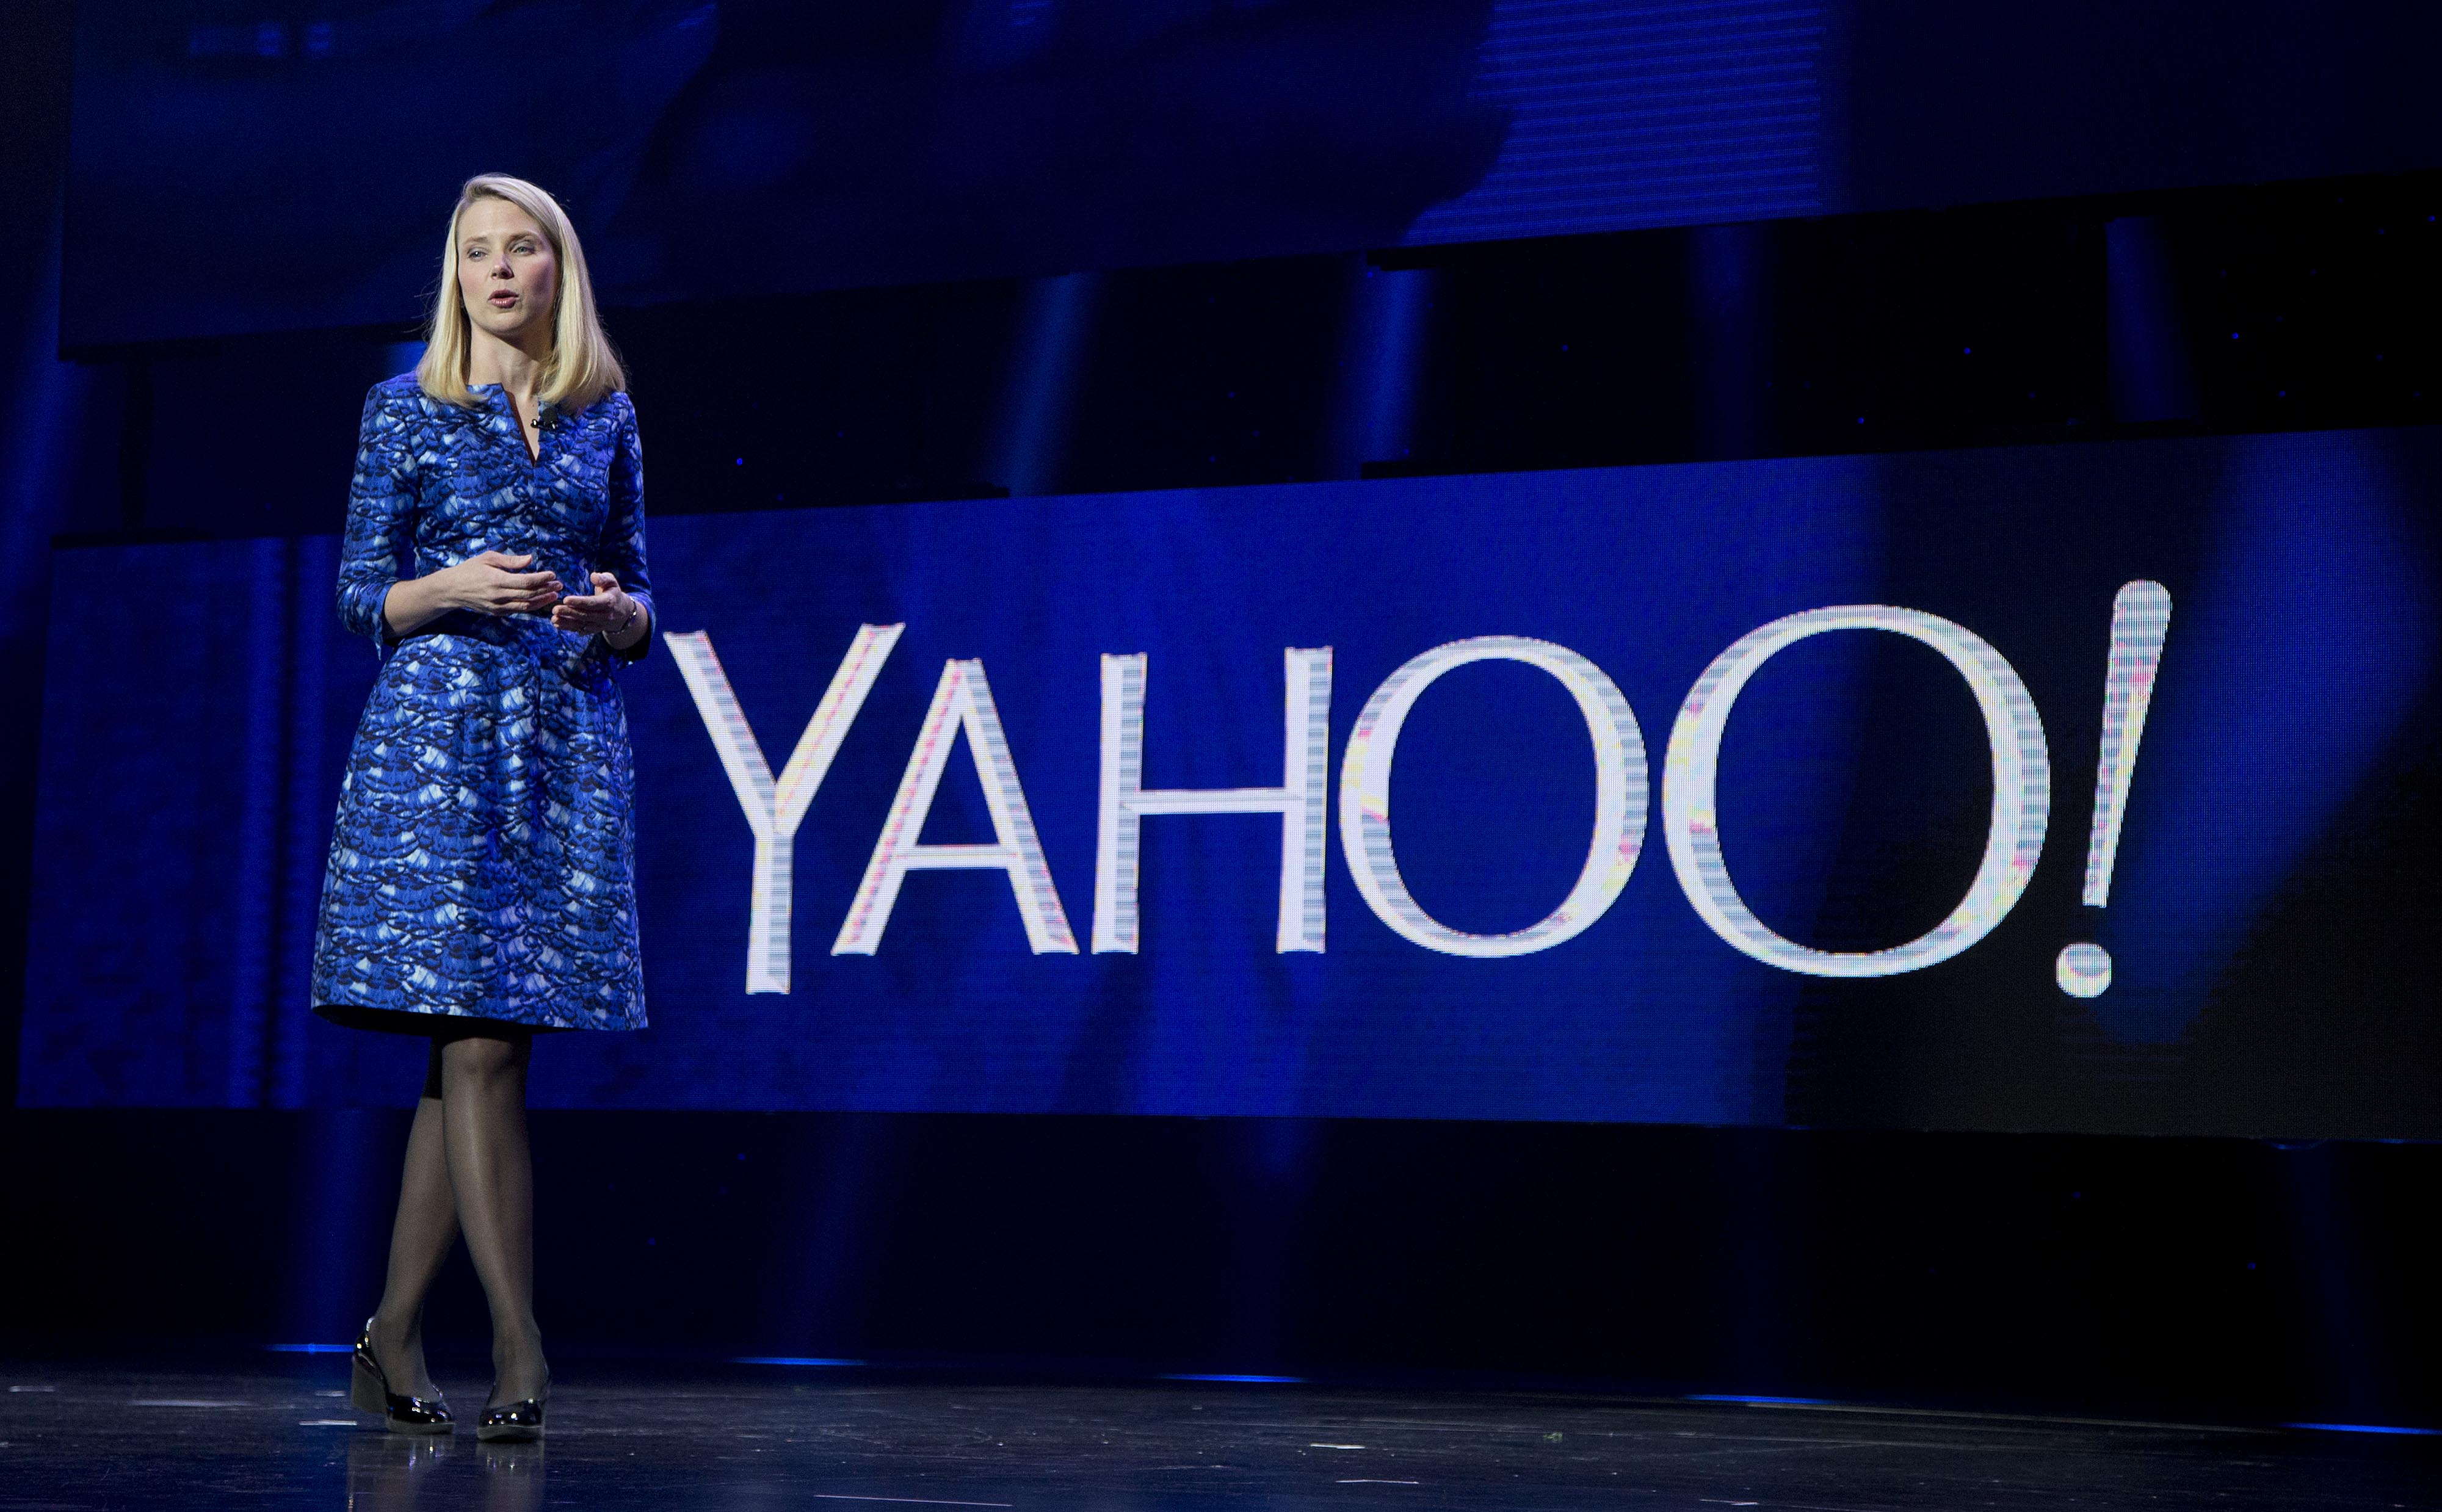 Yahoo president and CEO Marissa Mayer speaks during a keynote address at the International Consumer Electronics Show in Las Vegas on Jan. 7, 2014. (Julie Jacobson—AP)